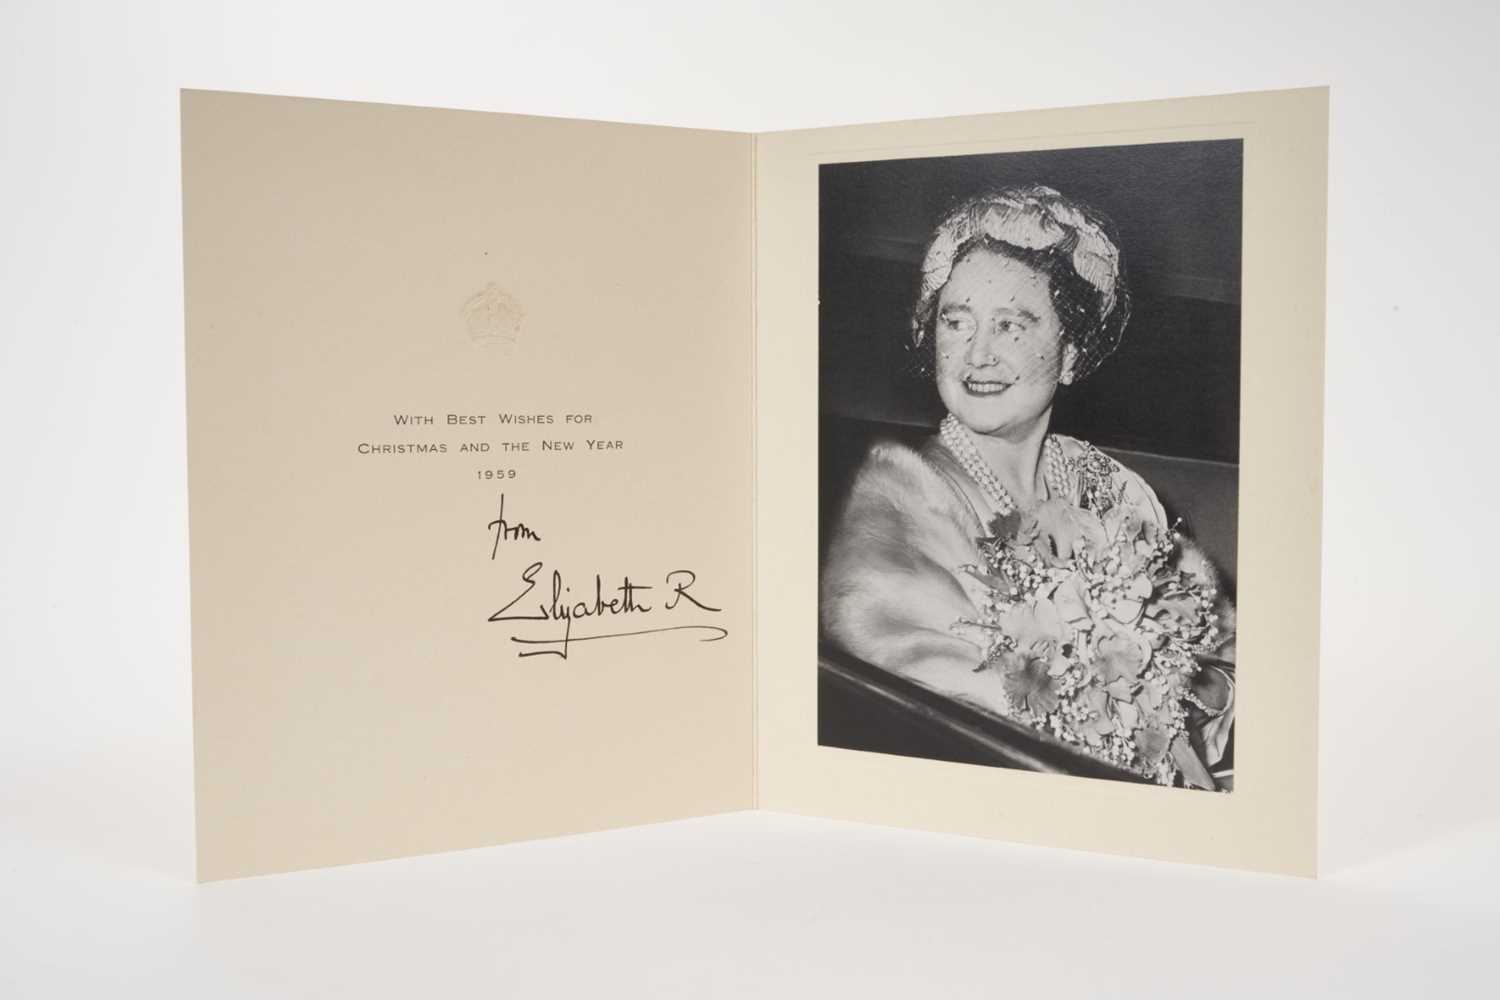 Lot 52 - H.M.Queen Elizabeth The Queen Mother, signed 1959 Christmas card with gilt crown to cover, photograph of Her Majesty smiling to the inside , signed '1959 from Elizabeth R'. Provenance: given to the...